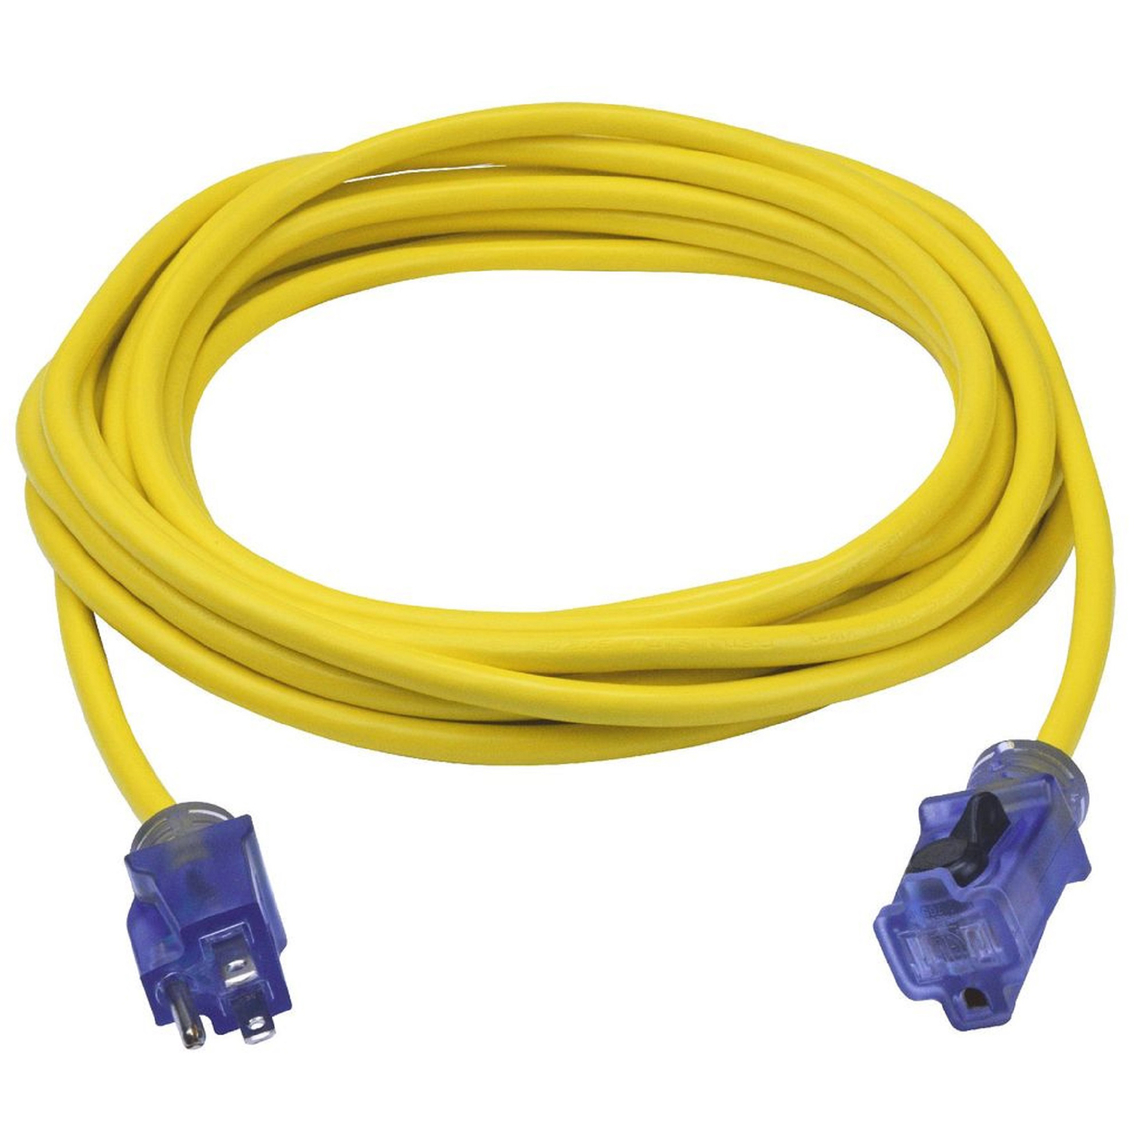 Prime Wire & Cable 25 ft. 14/3 SJTW Jobsite Outdoor Extension Cord - Image 2 of 2